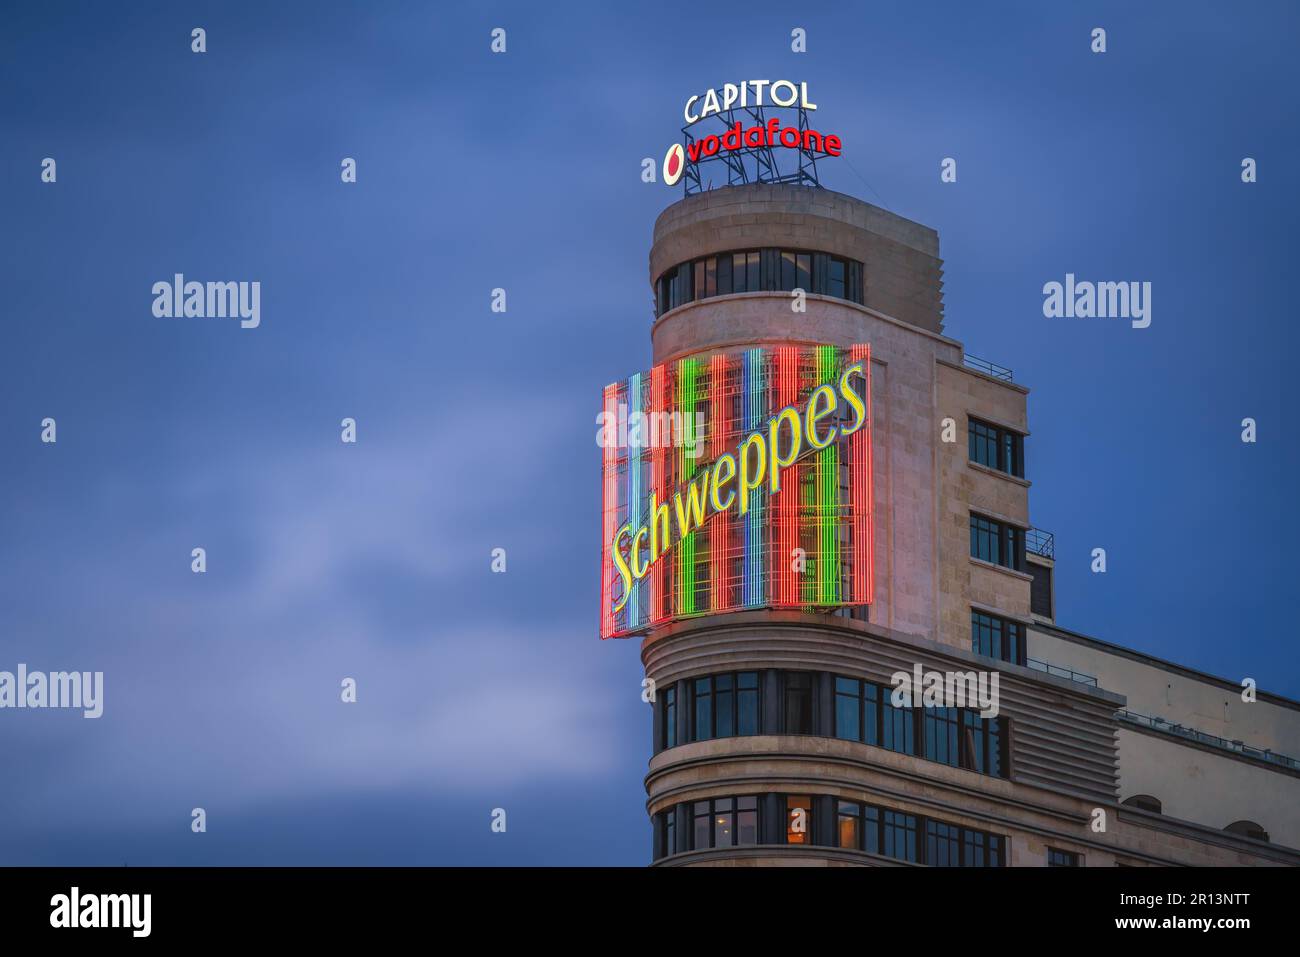 Schweppes neon sign of Edificio Capitol (or Carrion) Building at Gran Via Street - Madrid, Spain Stock Photo